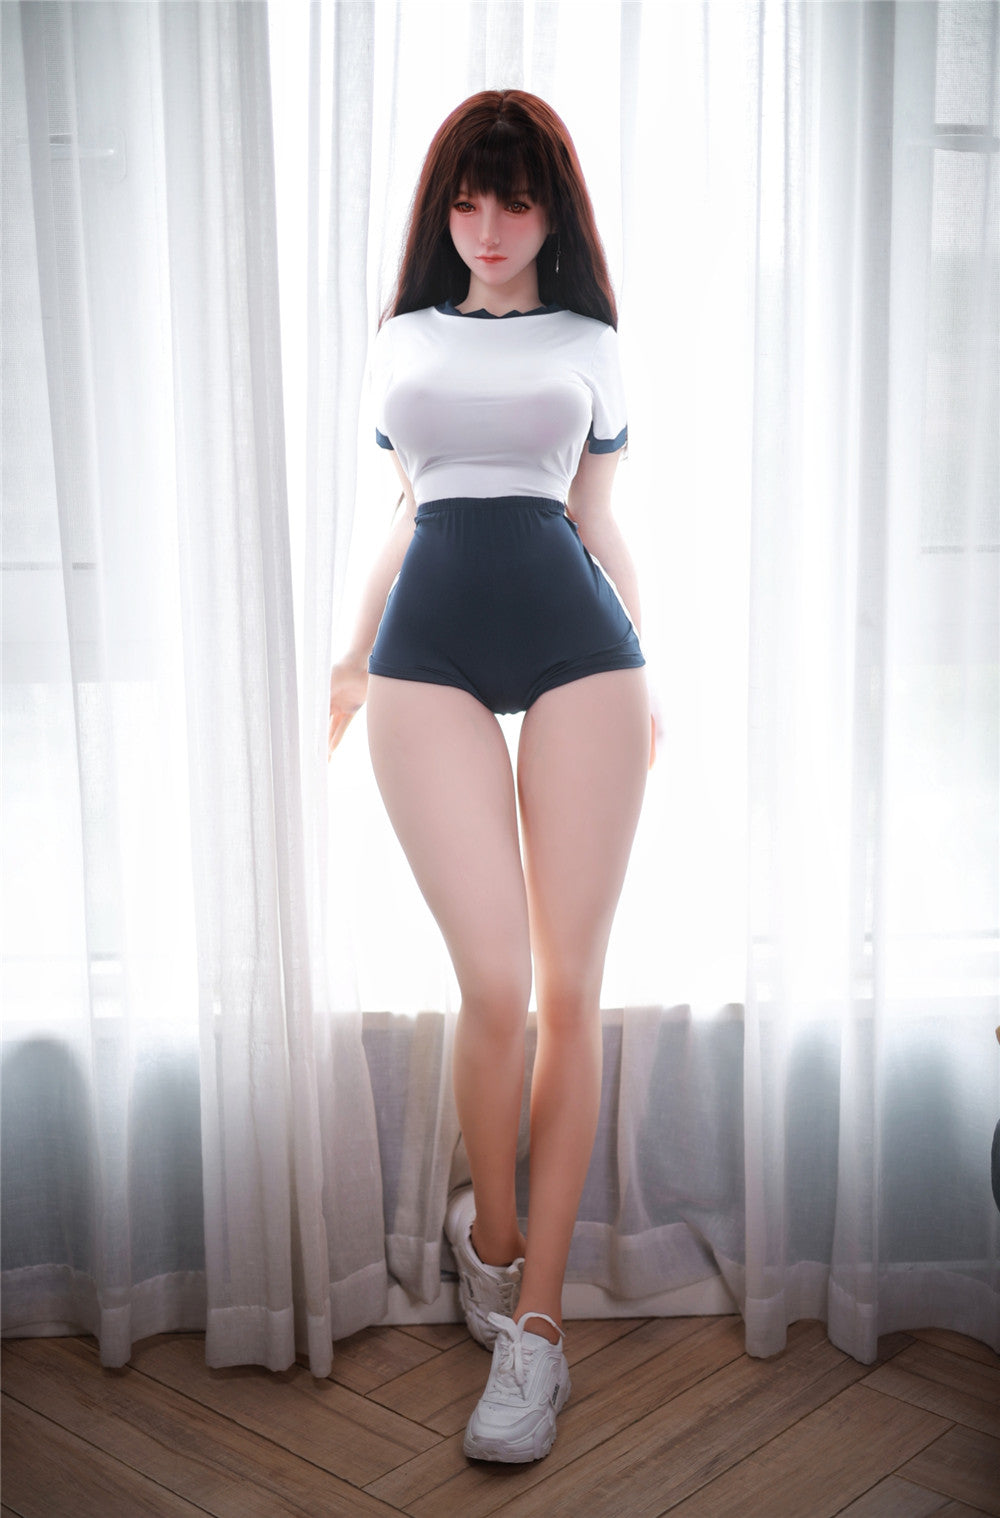 JY Doll - Real Sex Doll - 5ft 4in (163cm) - Madison - Love Dolls 4U